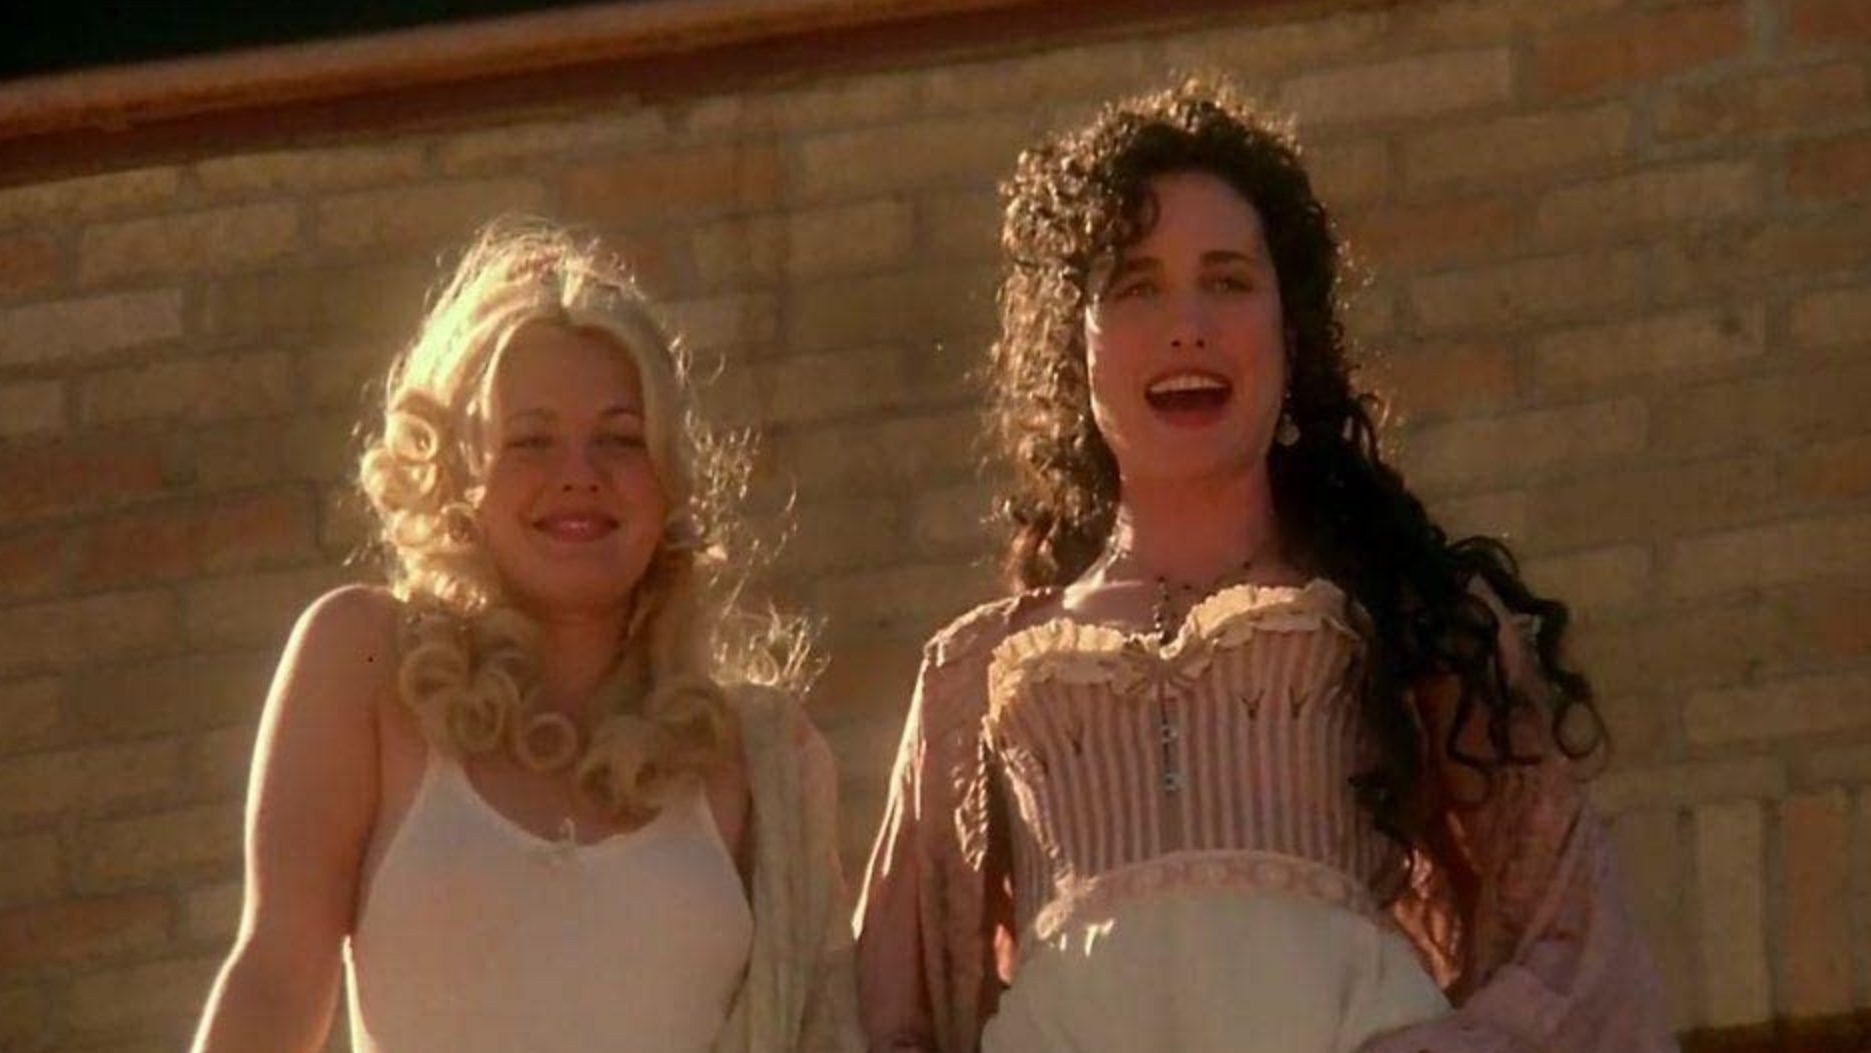 Drew Barrymore and Andie MacDowell in Bad Girls